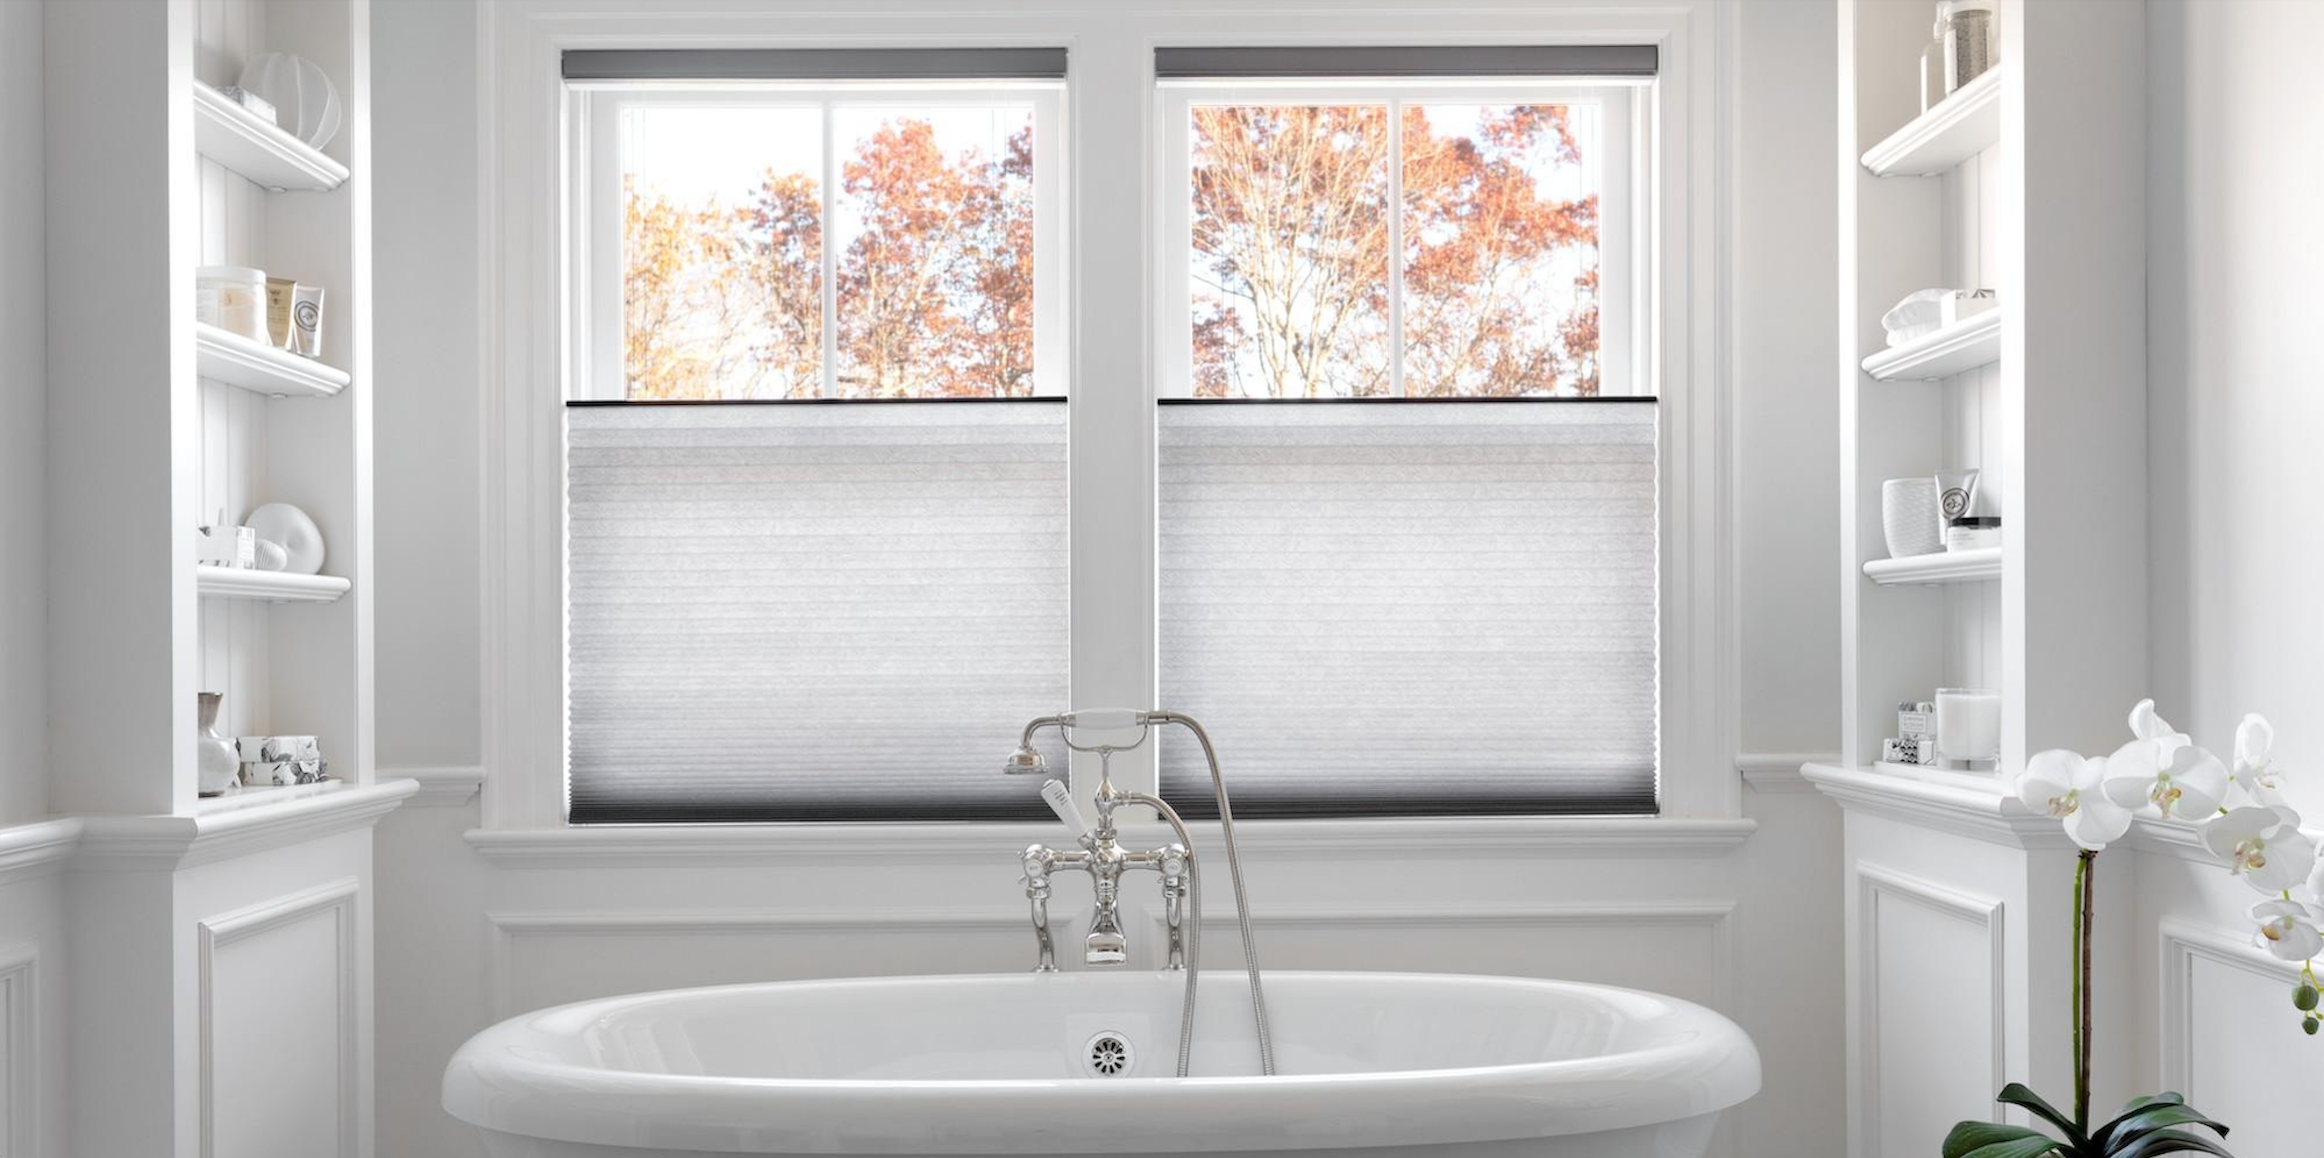 Two side-by-side windows showcase white cellular shades with the top lowered to let light in.